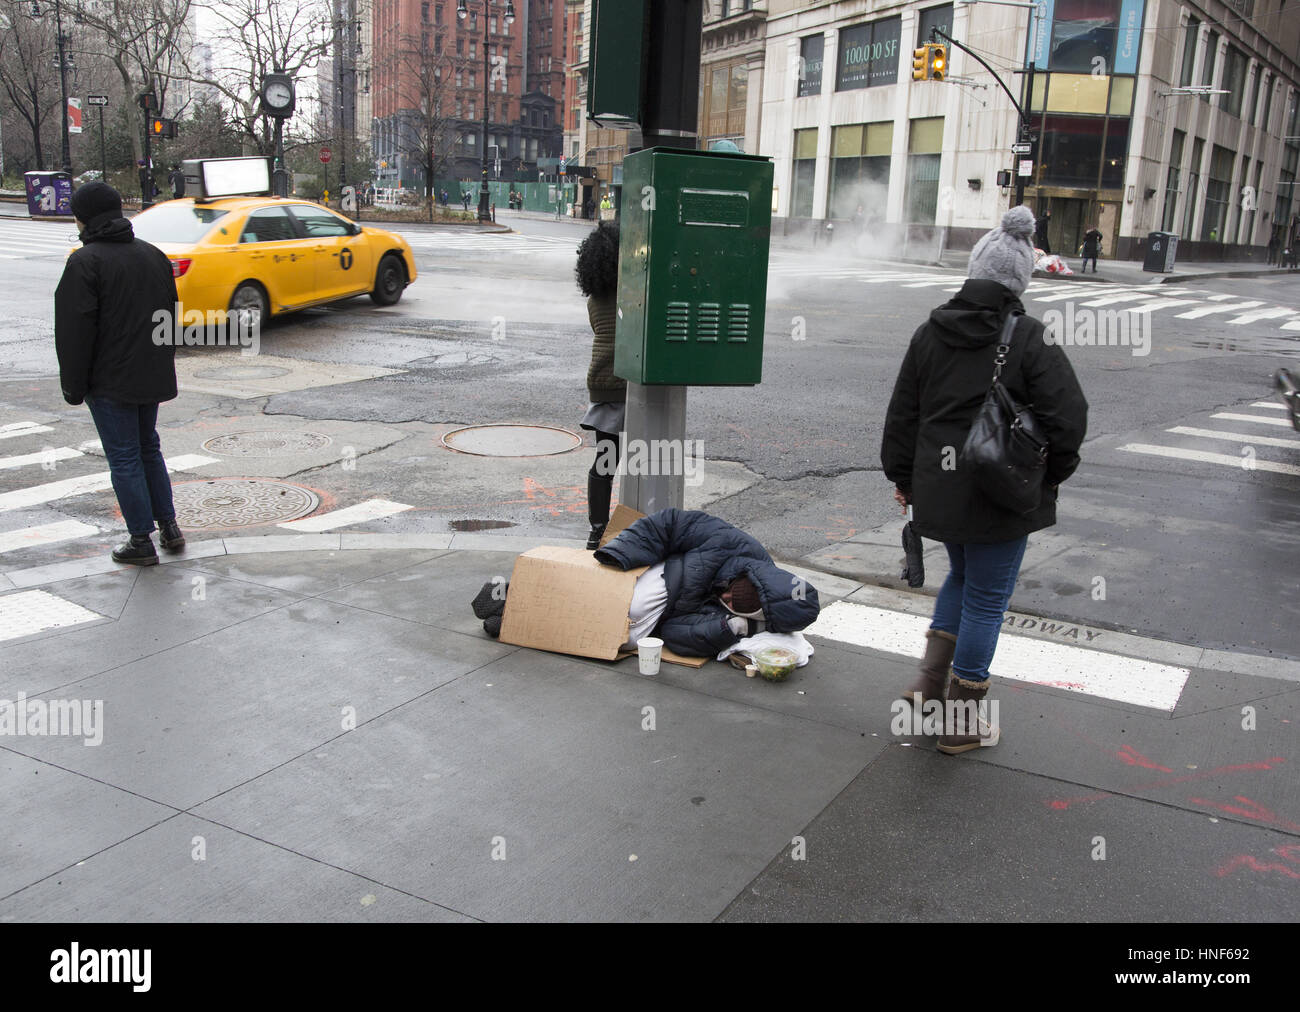 Homeless person prone on the sidewalk begging for money on Broadway in downtown Manhattan, NYC. Stock Photo